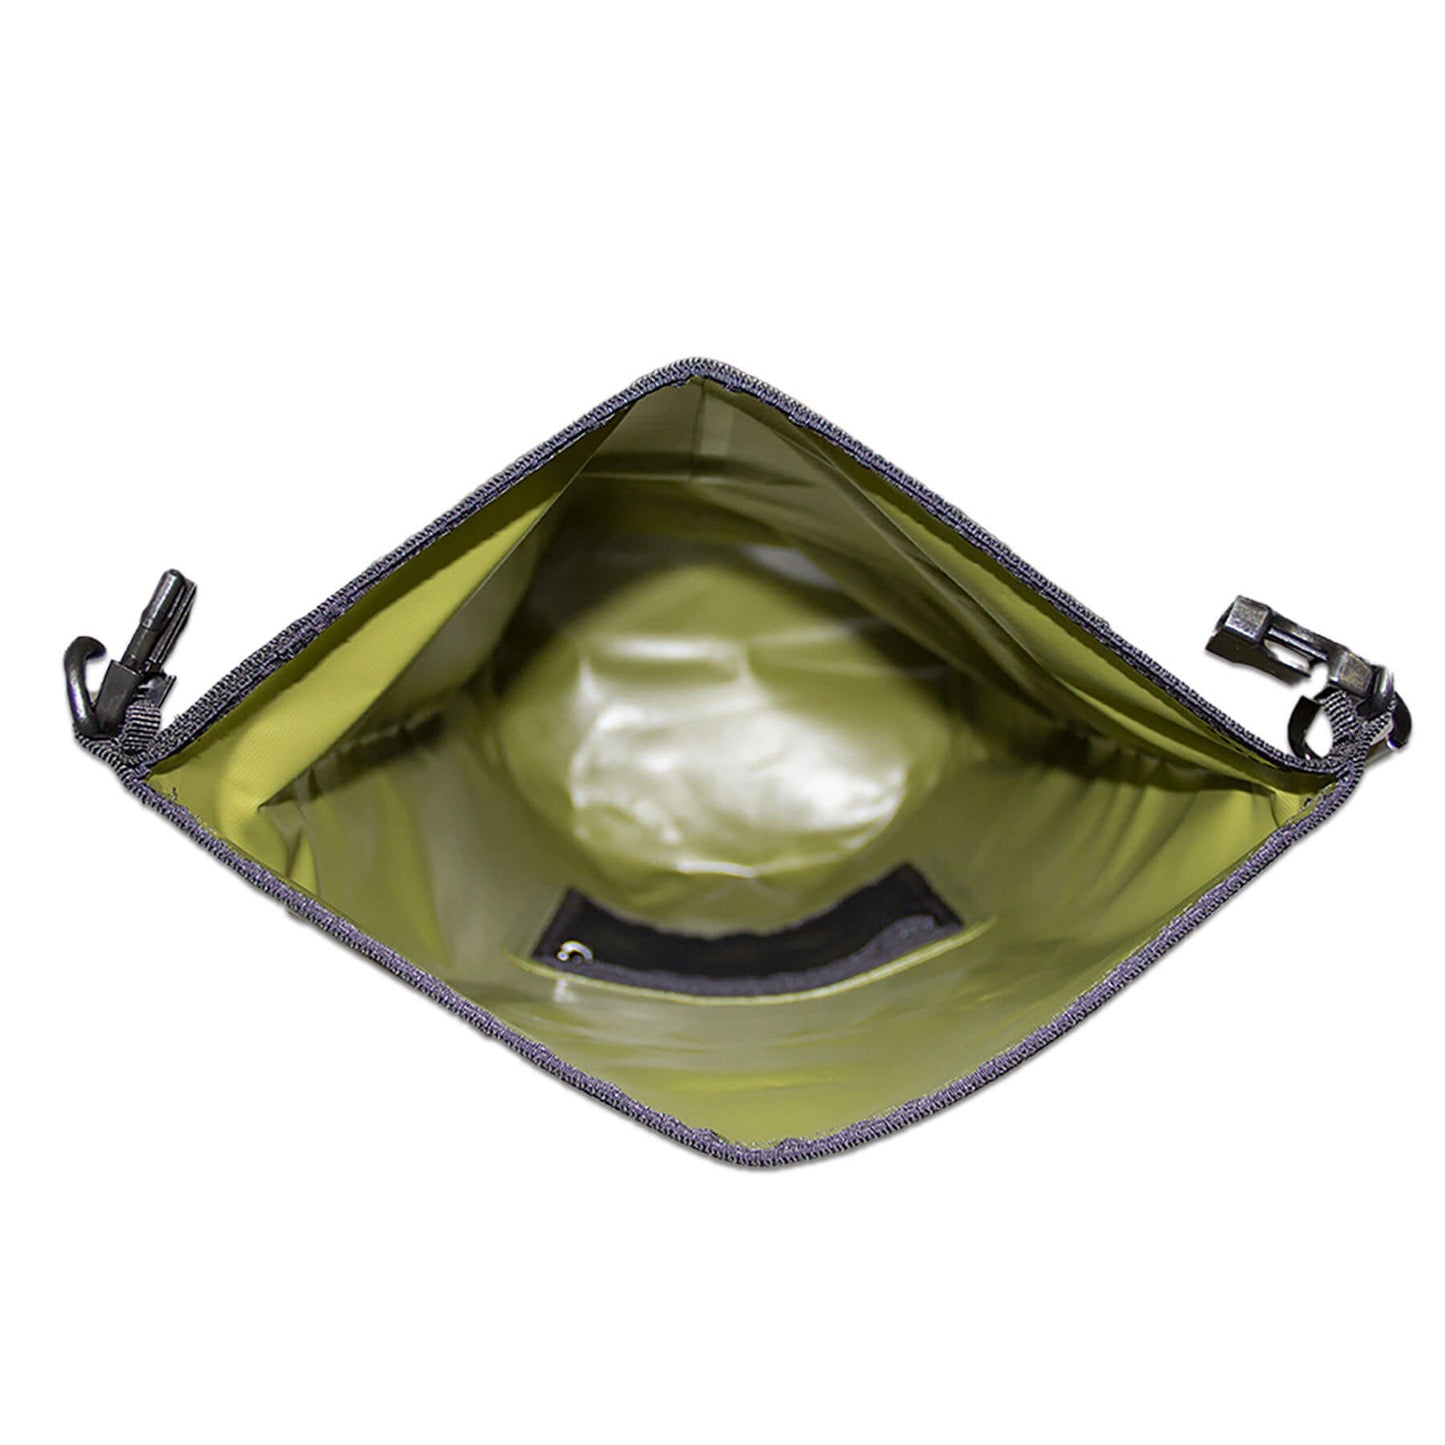 waterproof dry bag 20 litres with detachable comfort straps, D rings and handle in an olive green colour inside view